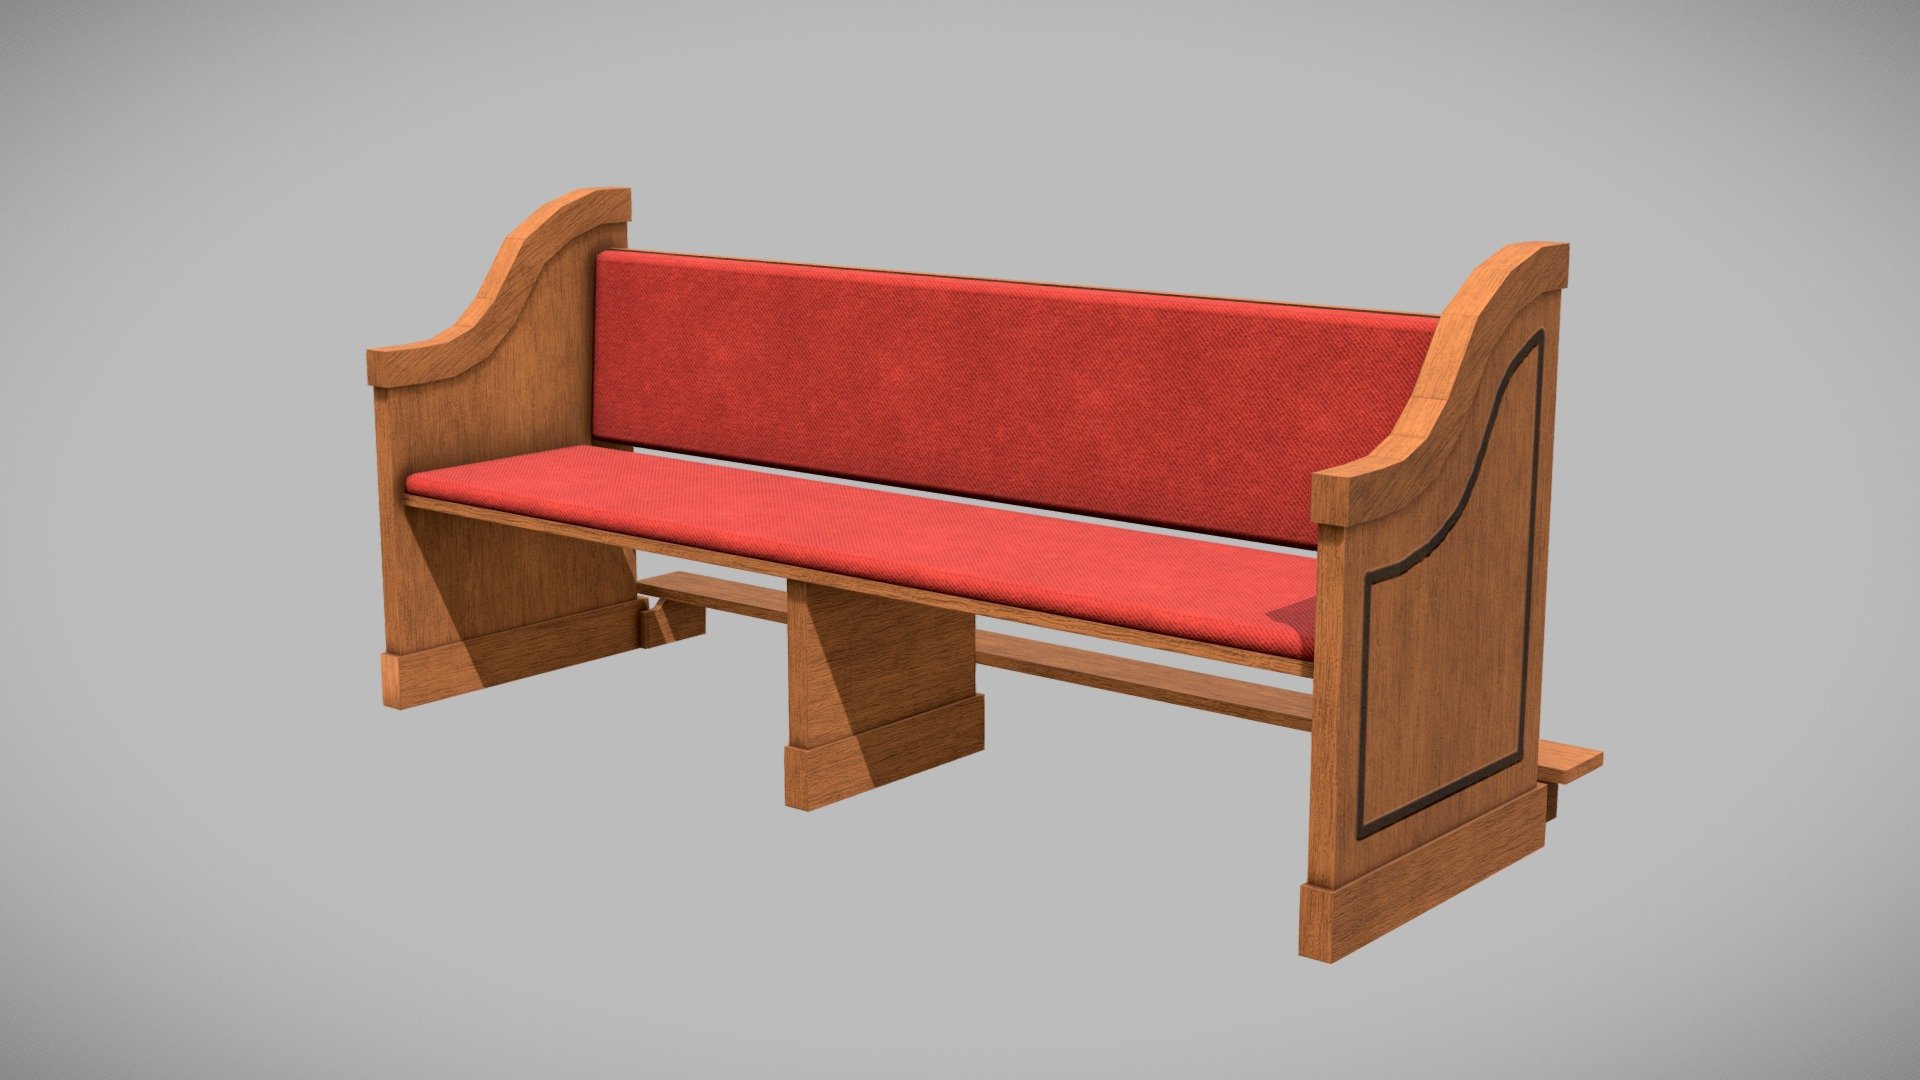 Low Poly Church Bench for your renders and games

Textures:

Diffuse color, Roughness, Normal, Height

All textures are 4K

Files Formats:

Blend

Fbx

Obj - Church Bench - Buy Royalty Free 3D model by Vanessa Araújo (@vanessa3d) 3d model